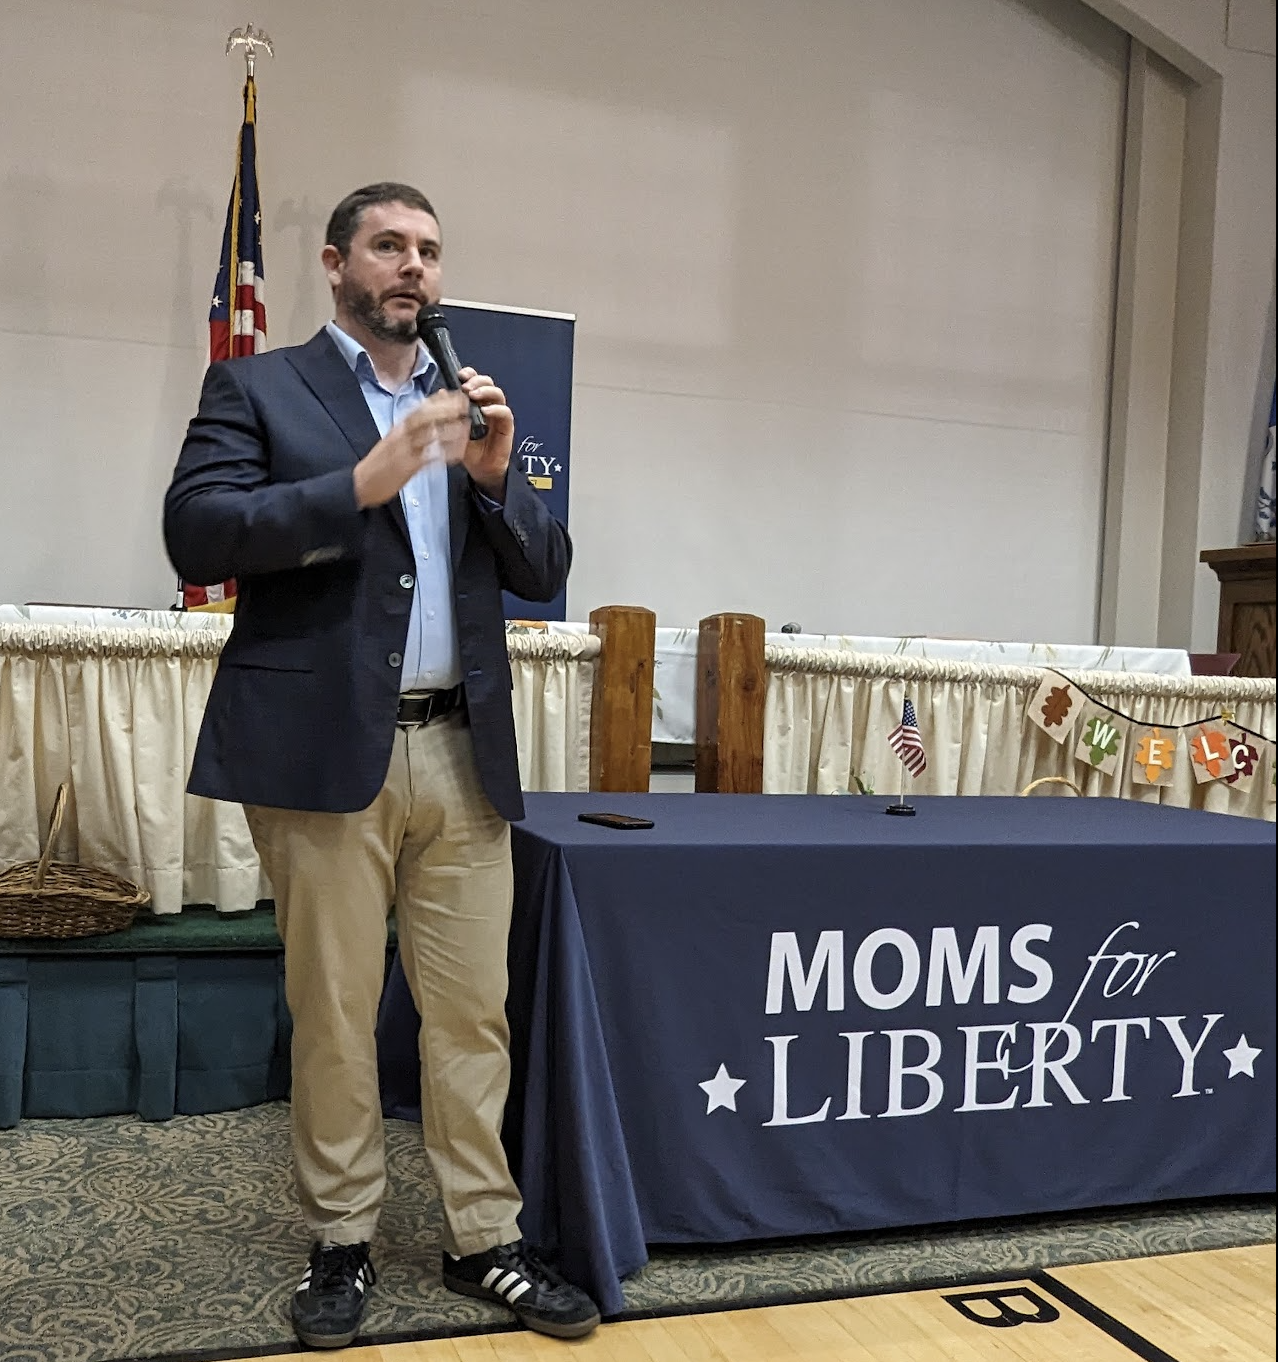 What Happened When Moms For Liberty Brought James Lindsay To CT. It's Not What The Mainstream Media Said.